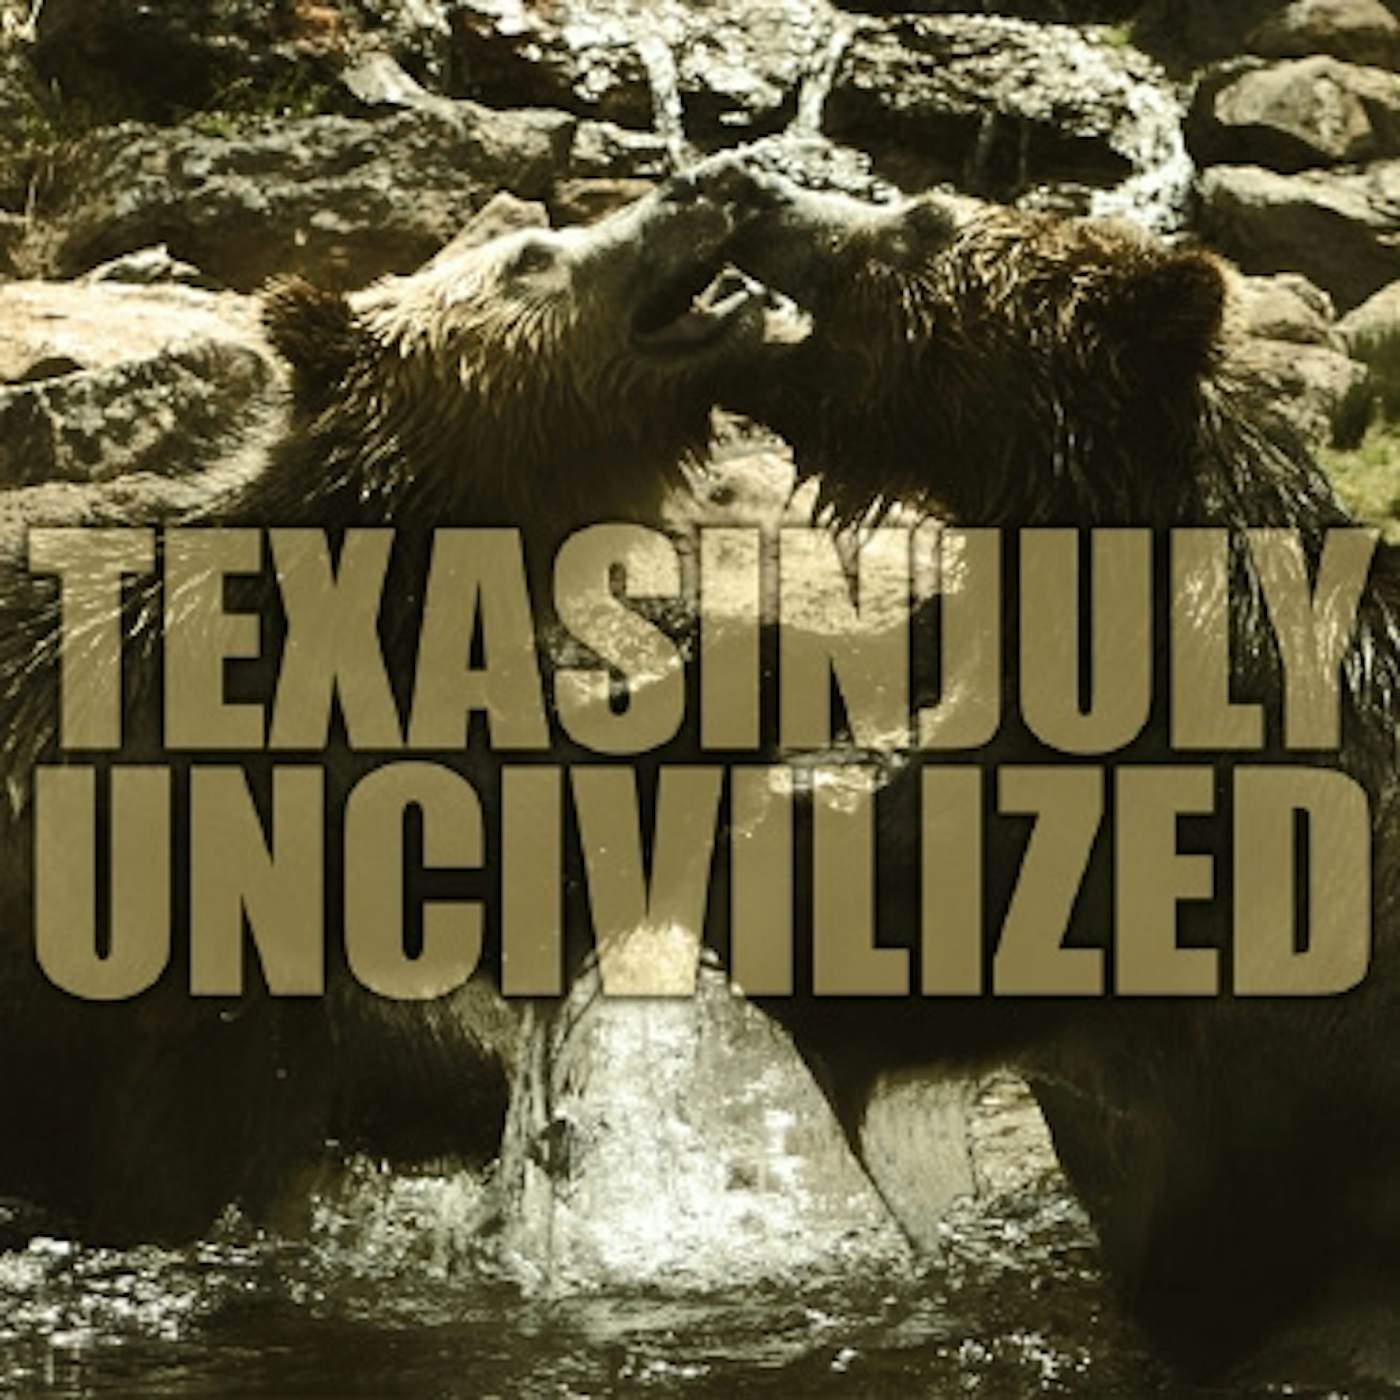 Texas In July Uncivilized Vinyl Record